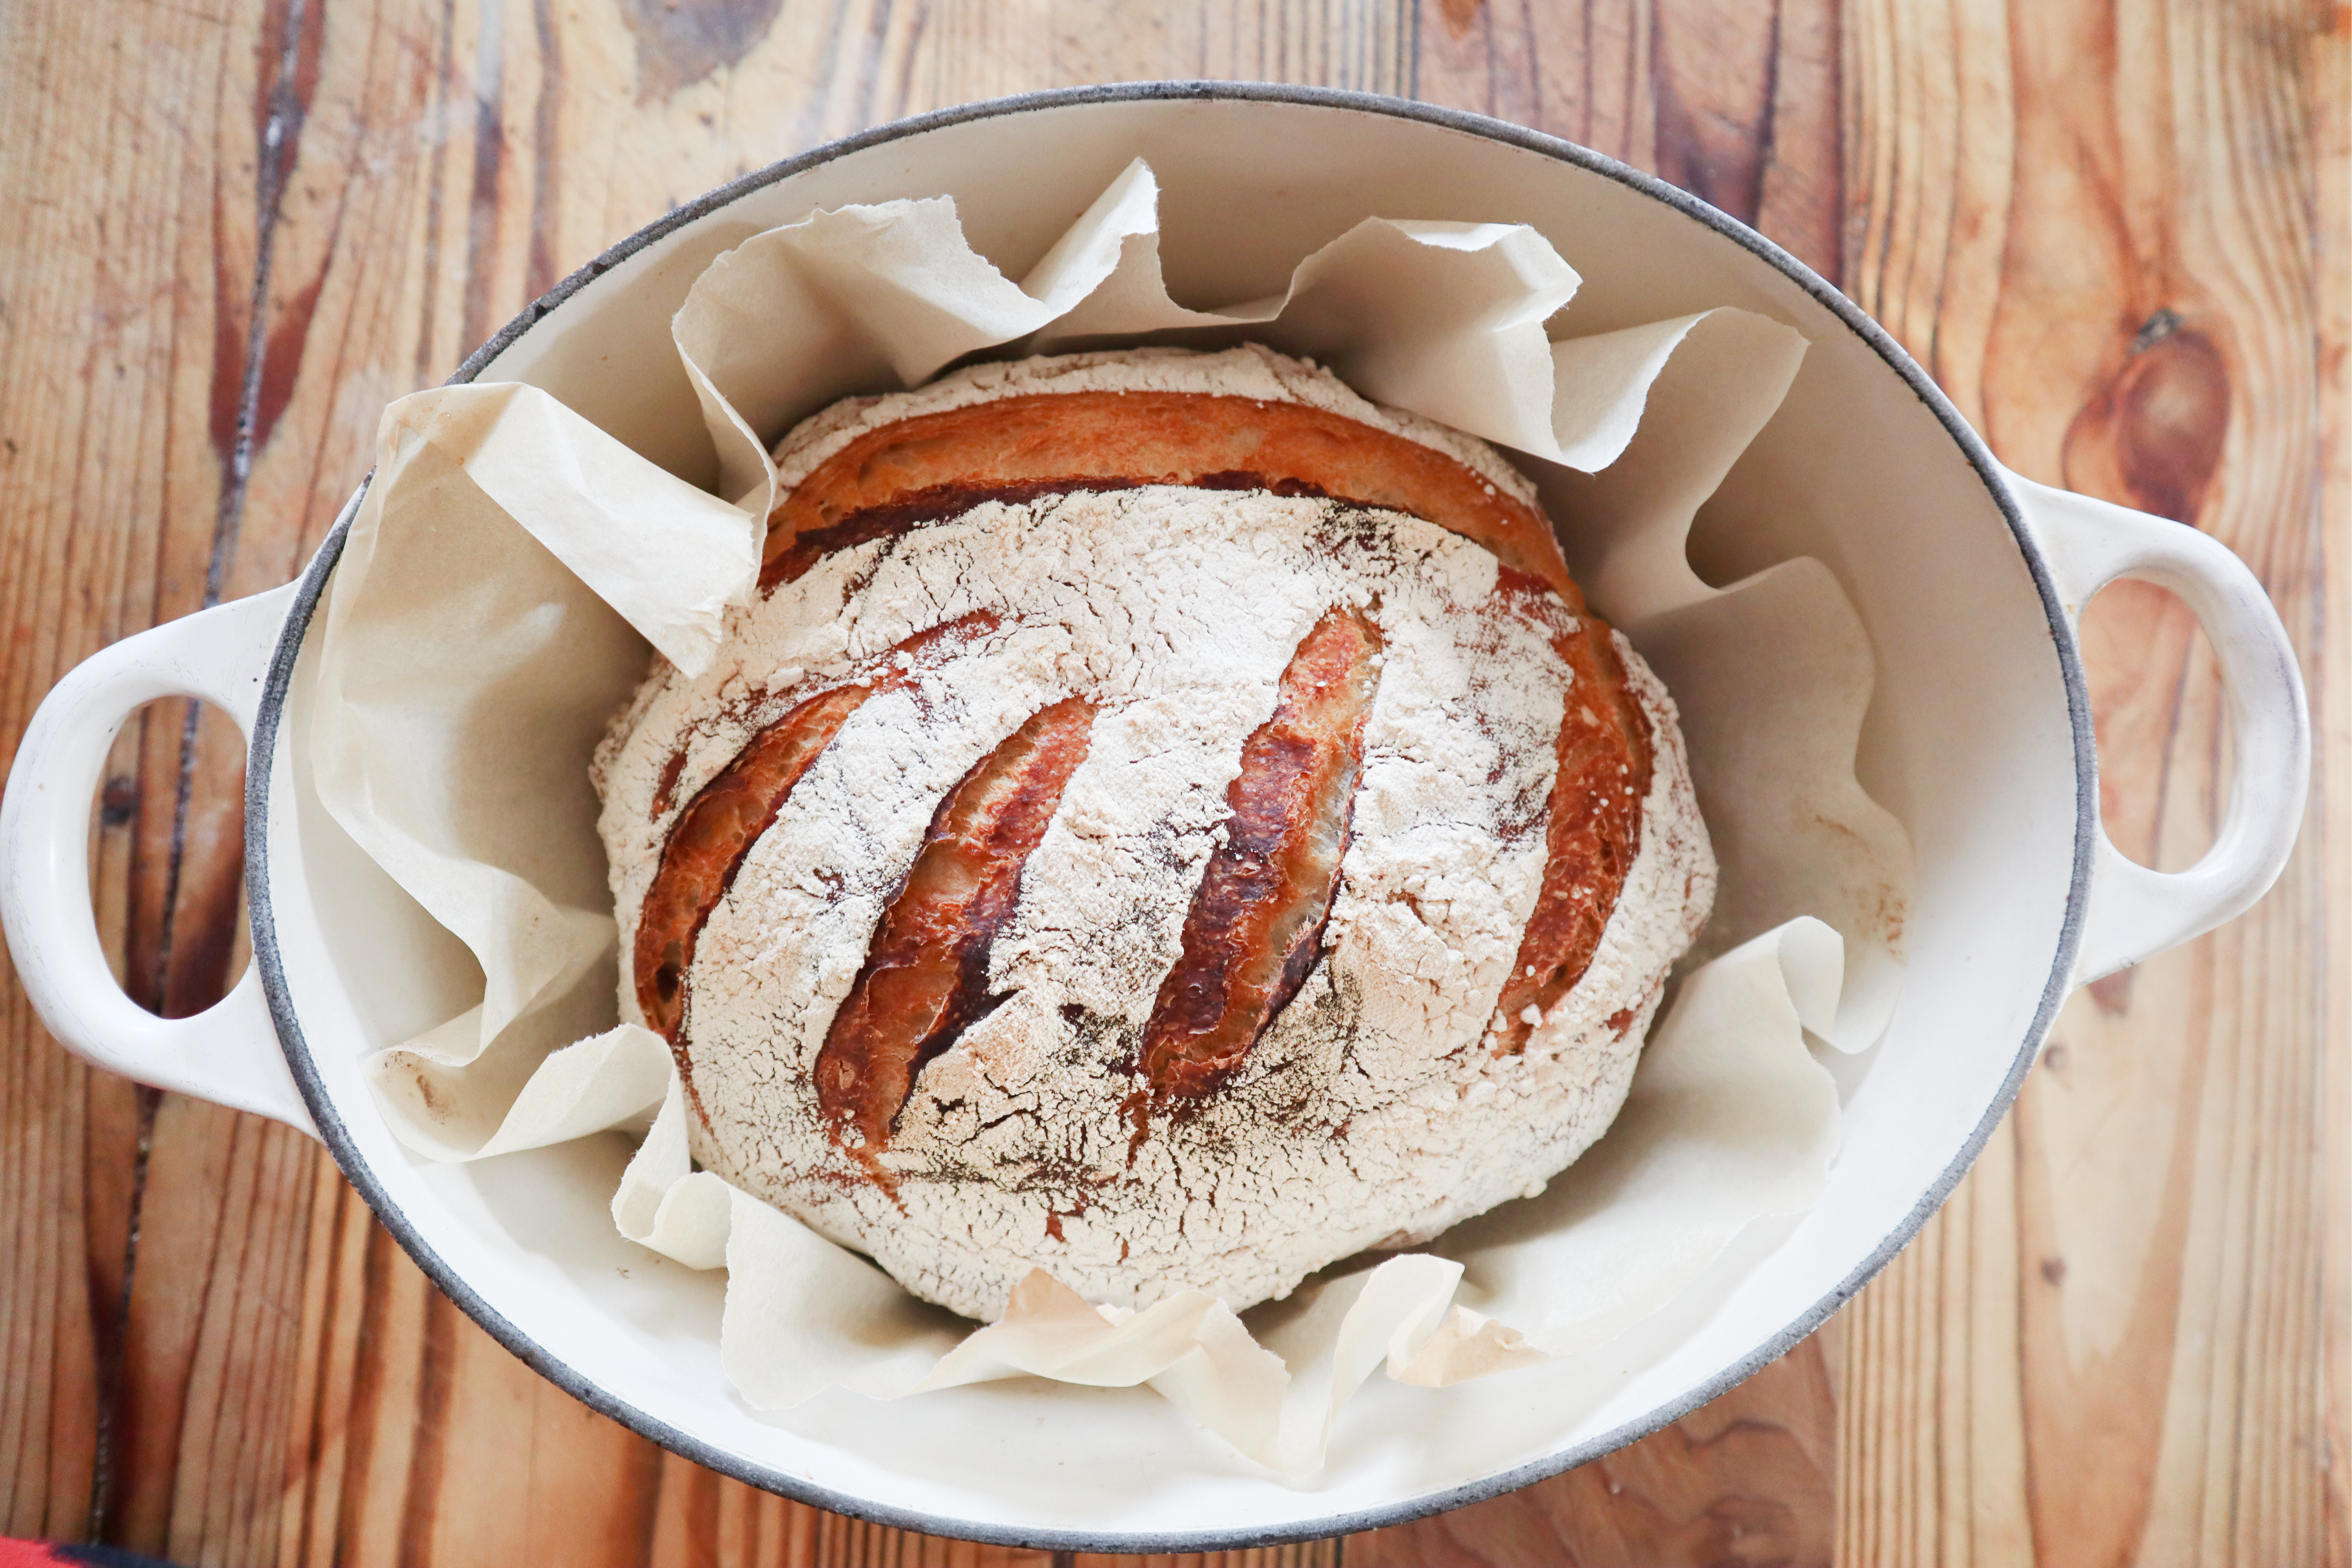 Beginners guide to making Sourdough bread